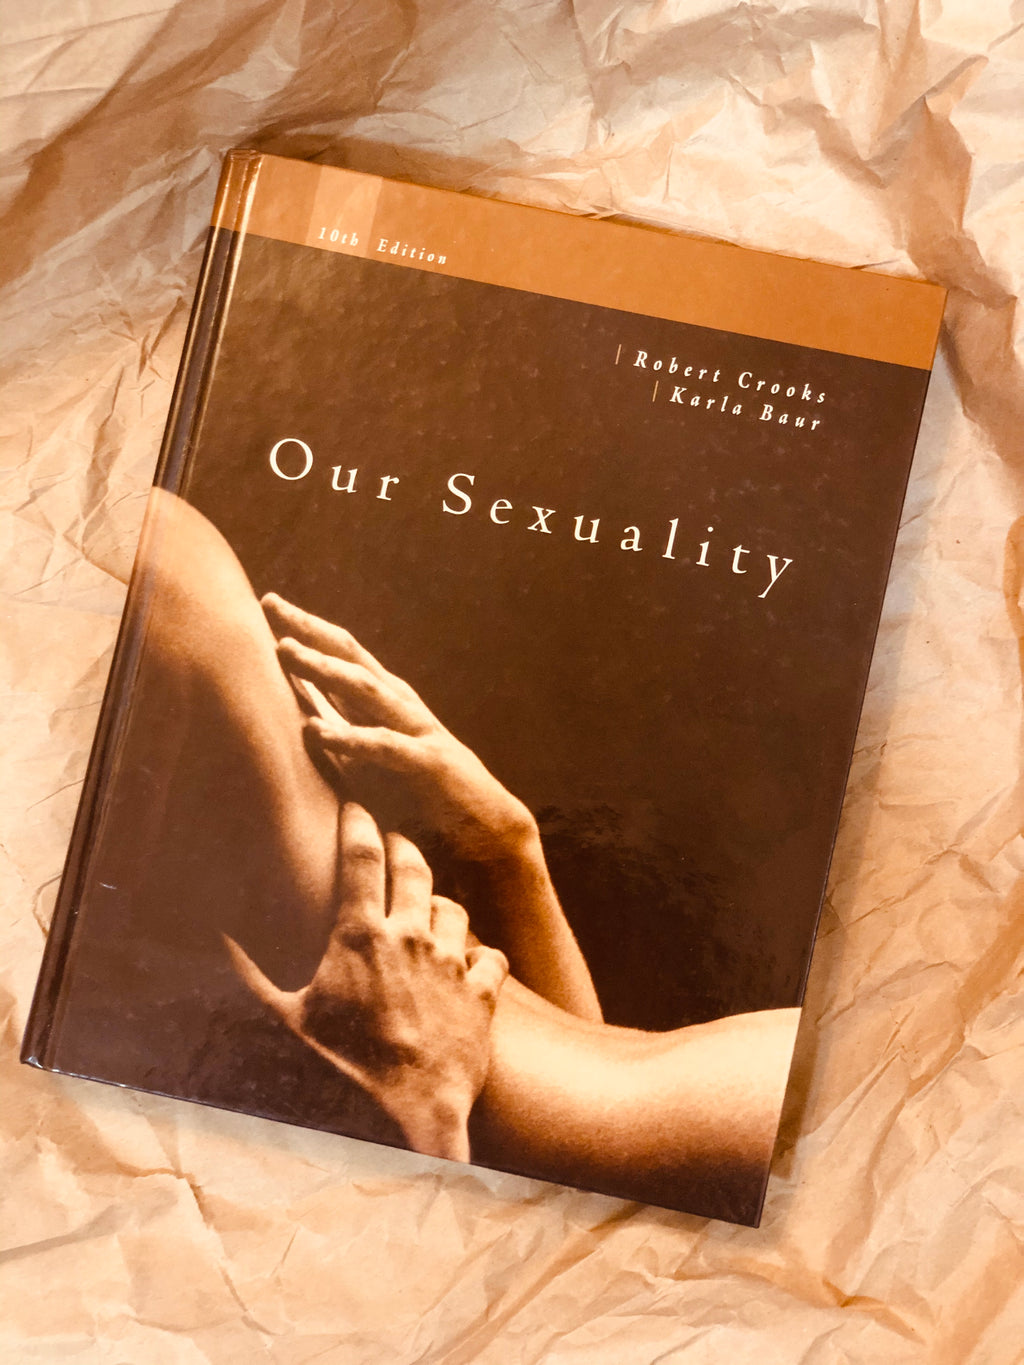 Our Sexuality- By Robert Crooks and Karla Baur